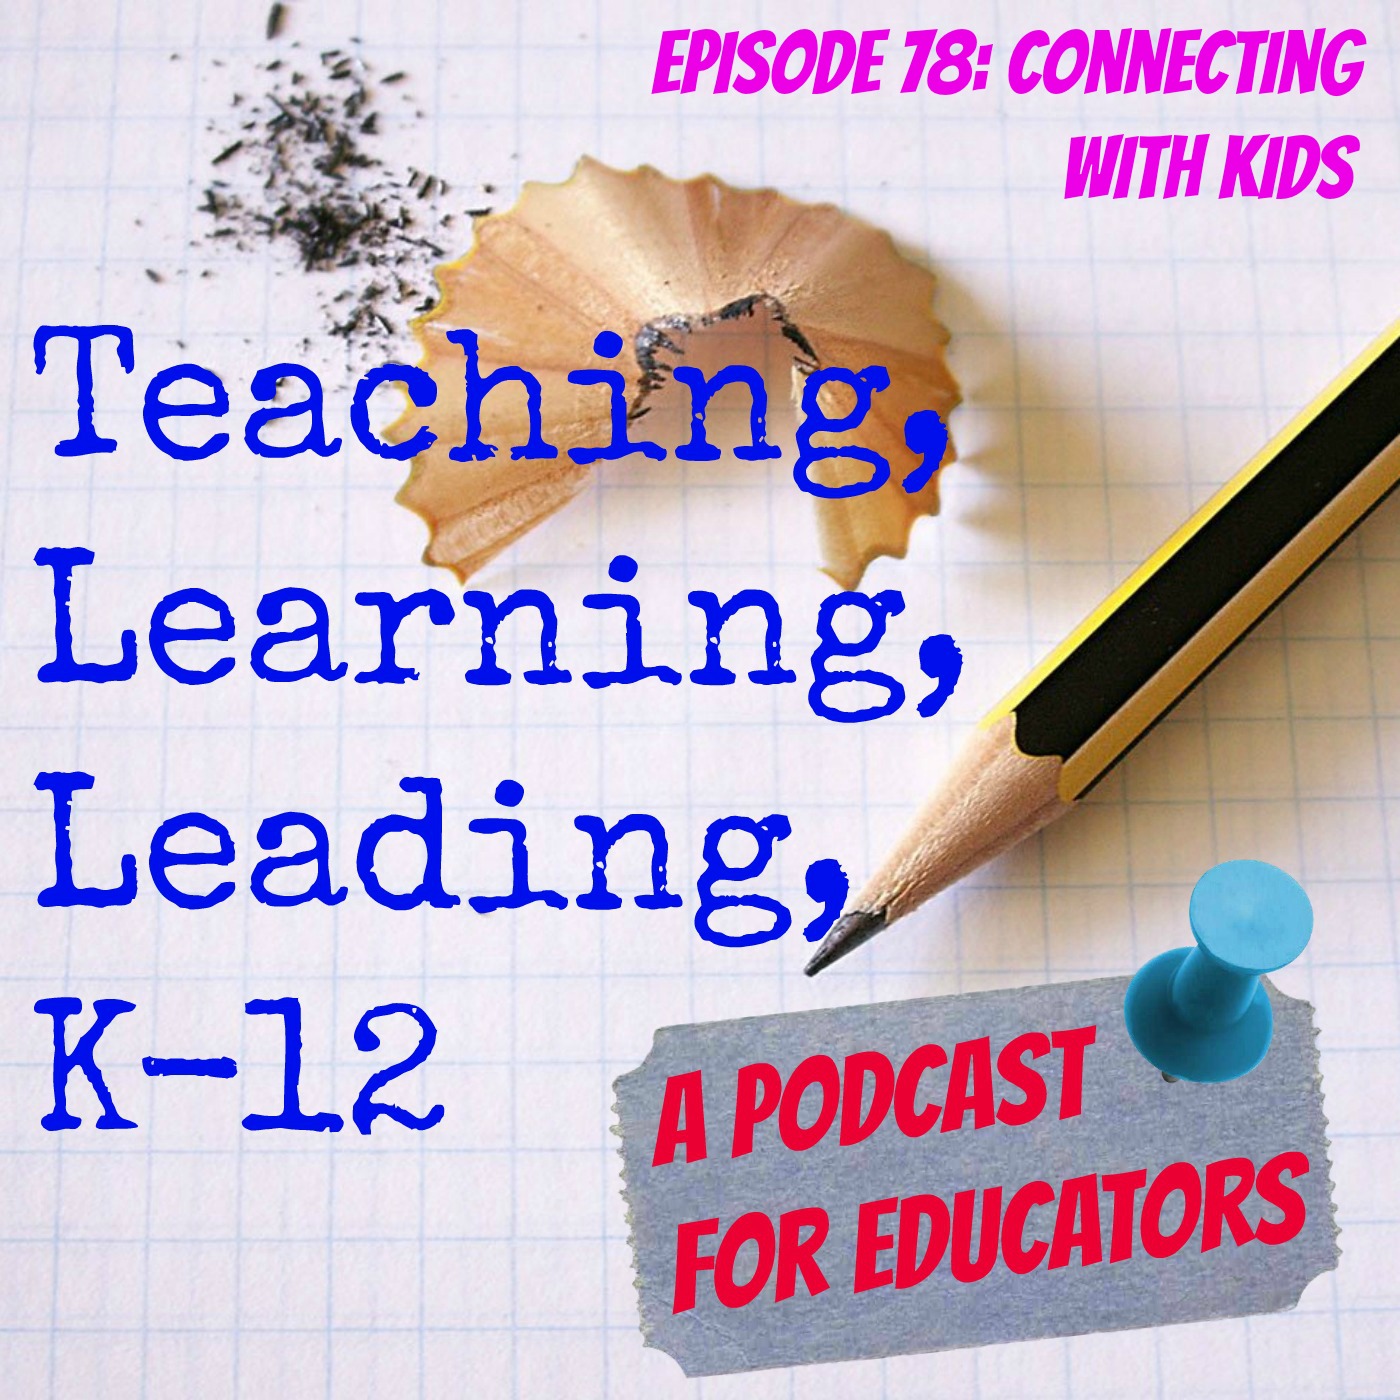 Episode 78: Connecting with Kids